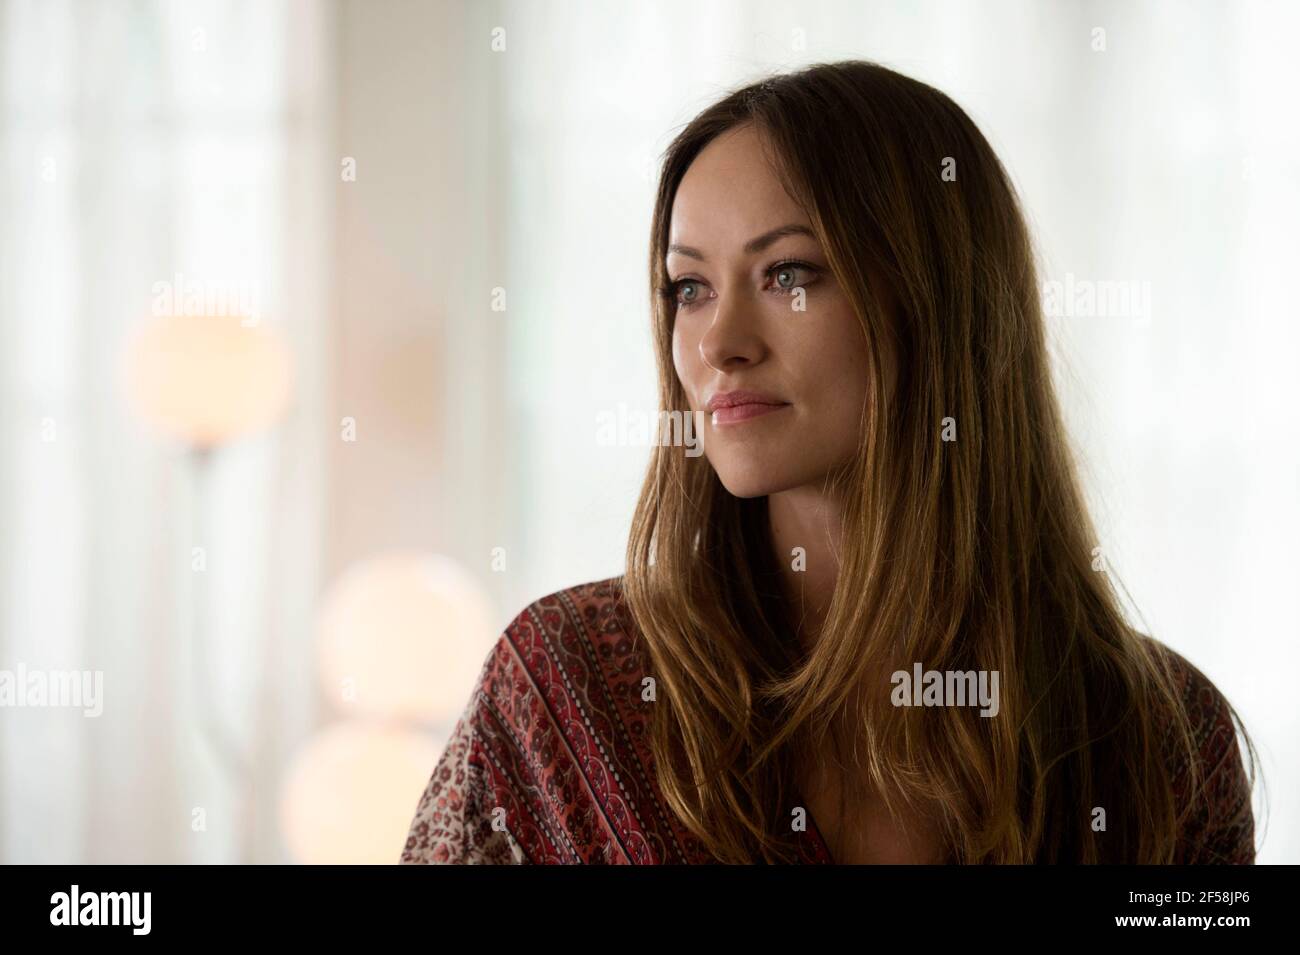 OLIVIA WILDE in VINYL (2016), directed by MARTIN SCORSESE and MICK JAGGER.  Credit: HOME BOX OFFICE (HBO) / Album Stock Photo - Alamy